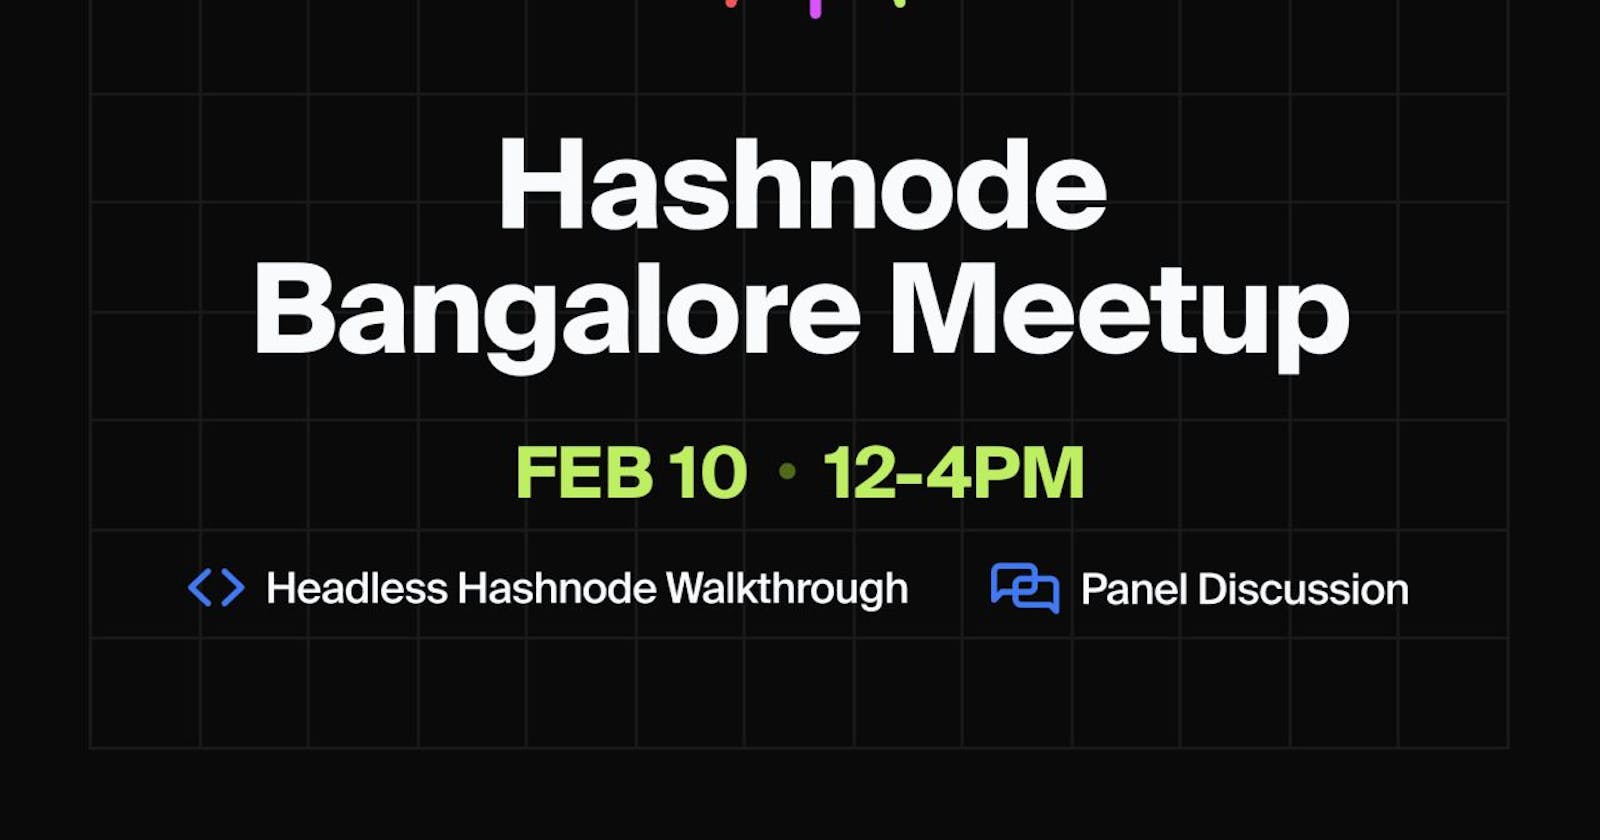 Insights from the "Headless and Happy Hours" Event by Hashnode